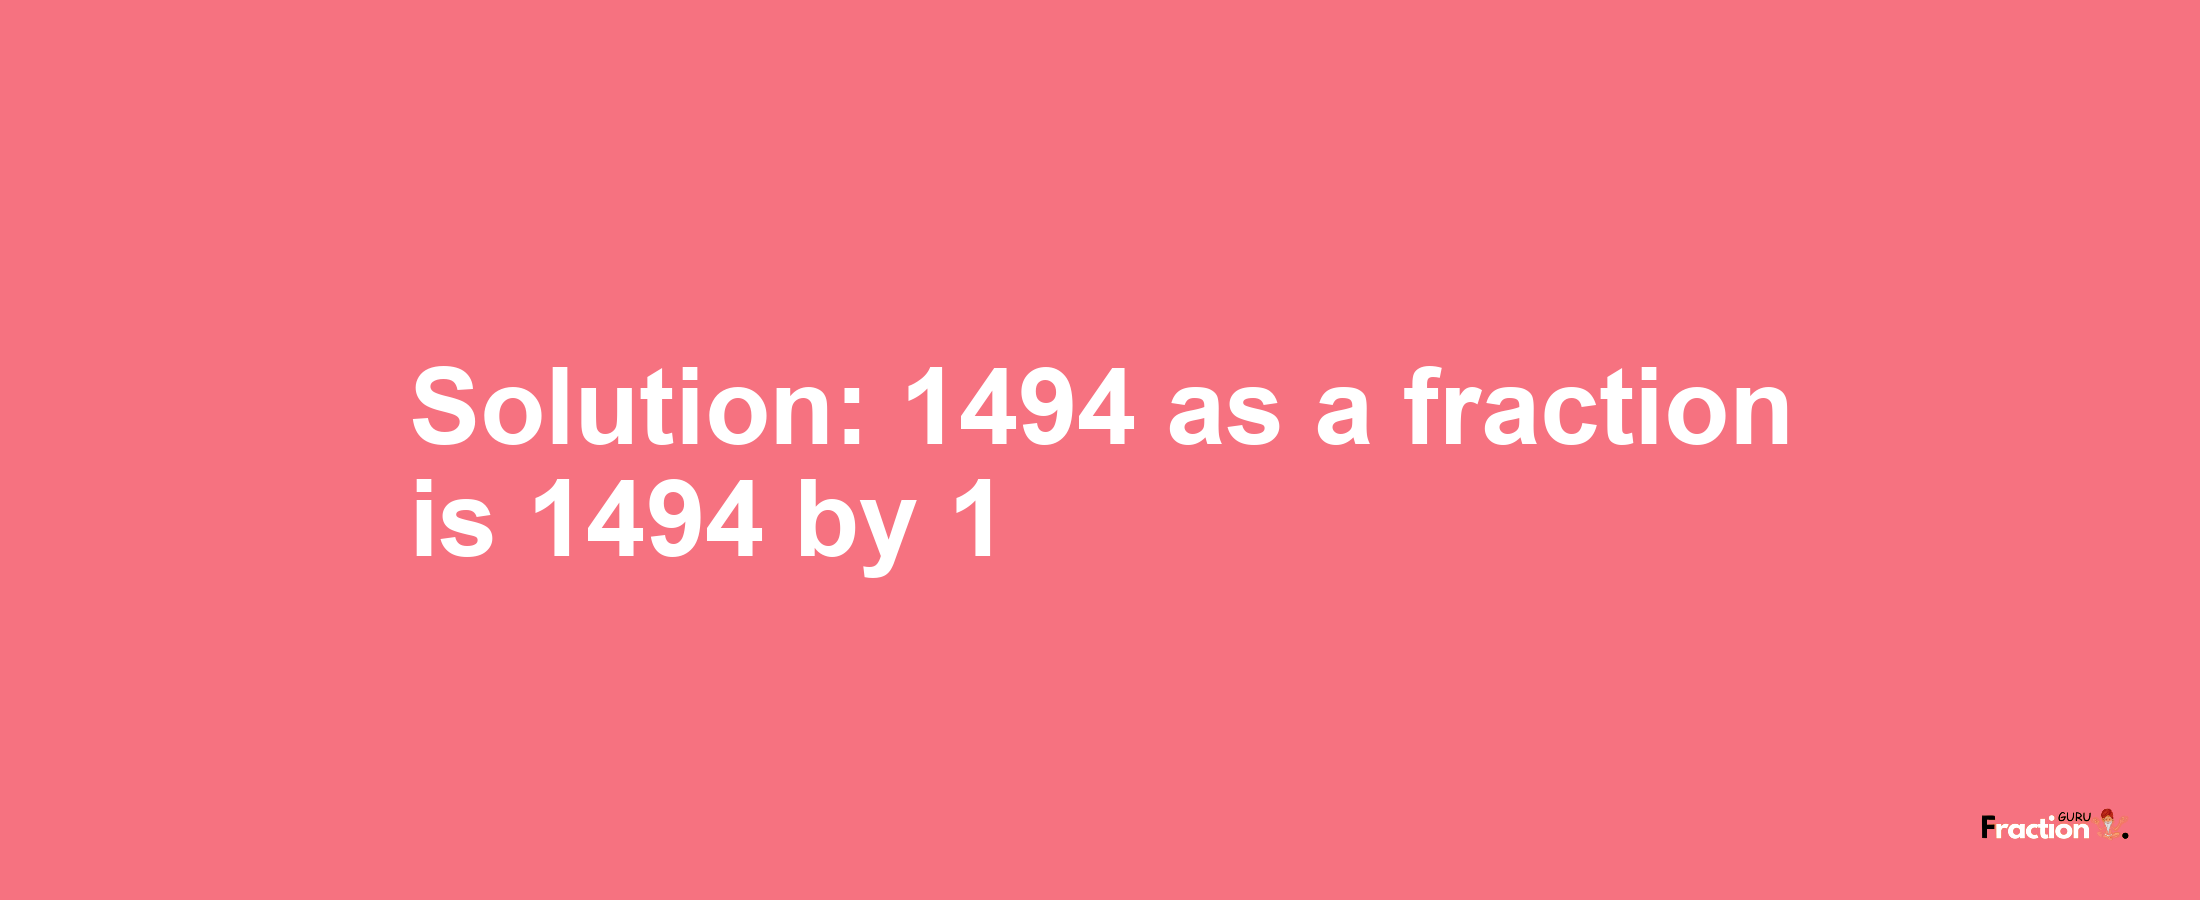 Solution:1494 as a fraction is 1494/1